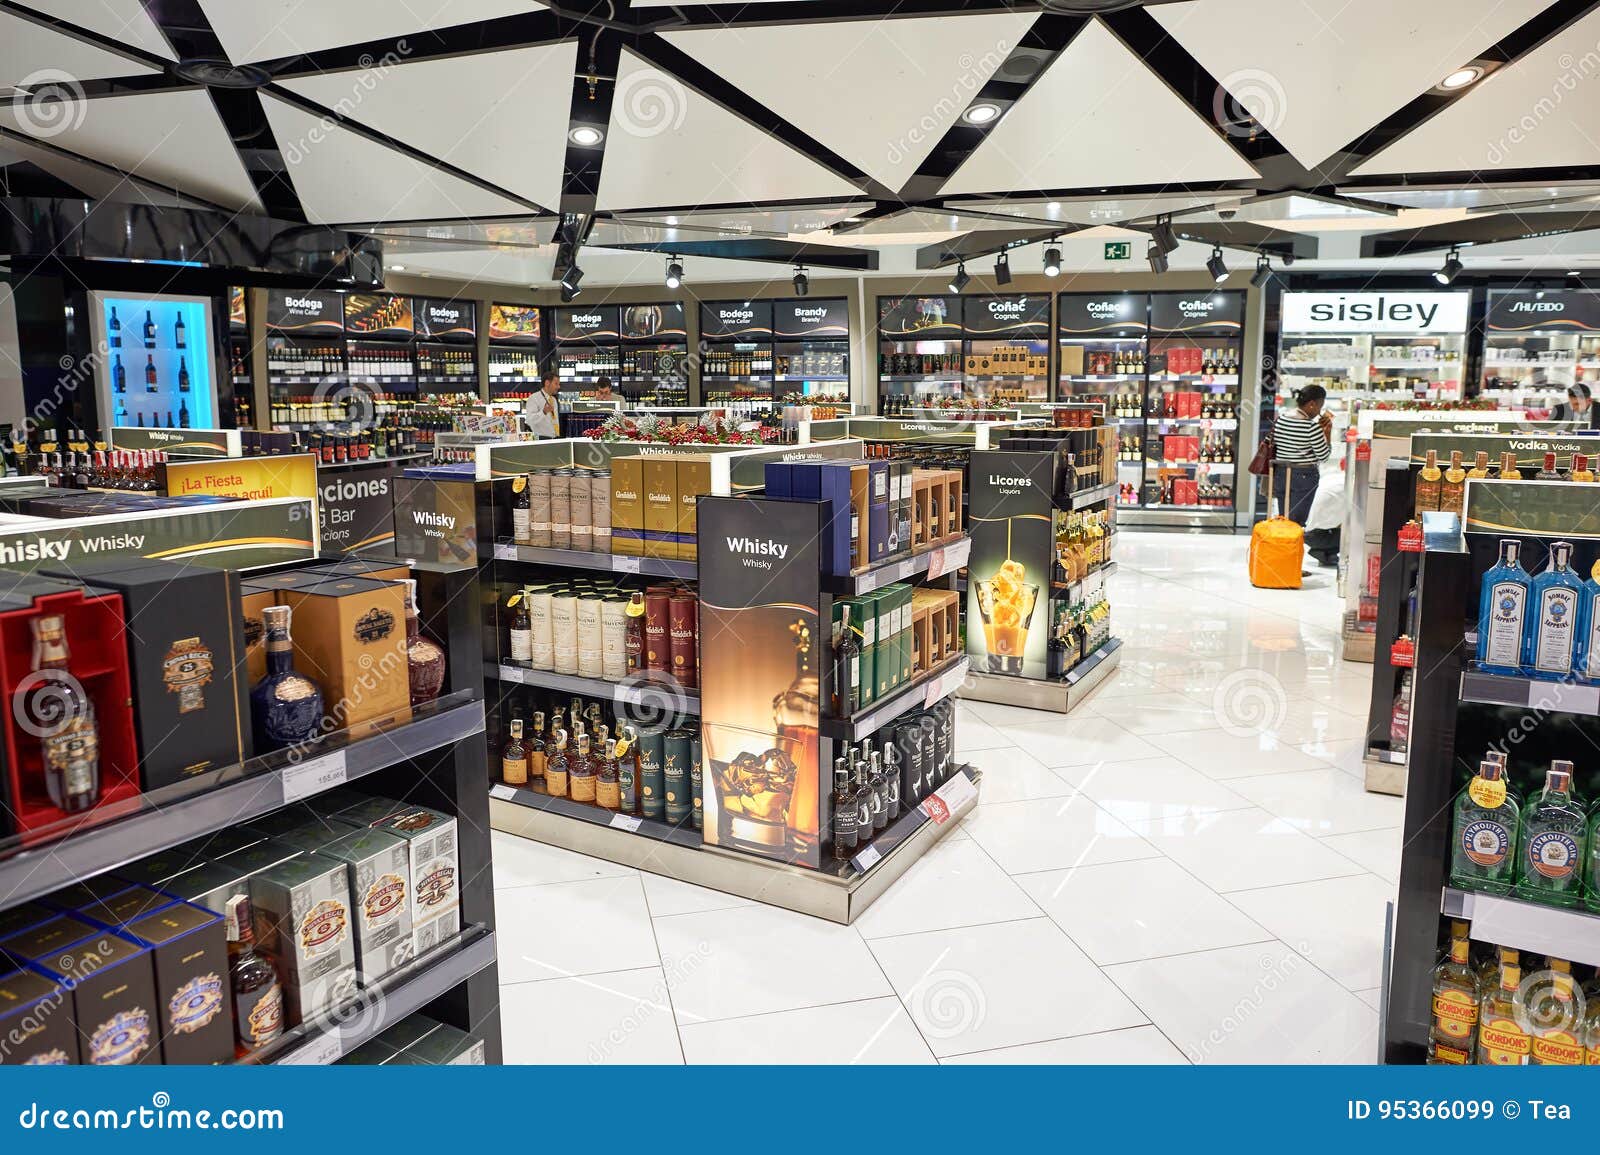 Duty free shop editorial stock image. Image of modern - 95366099